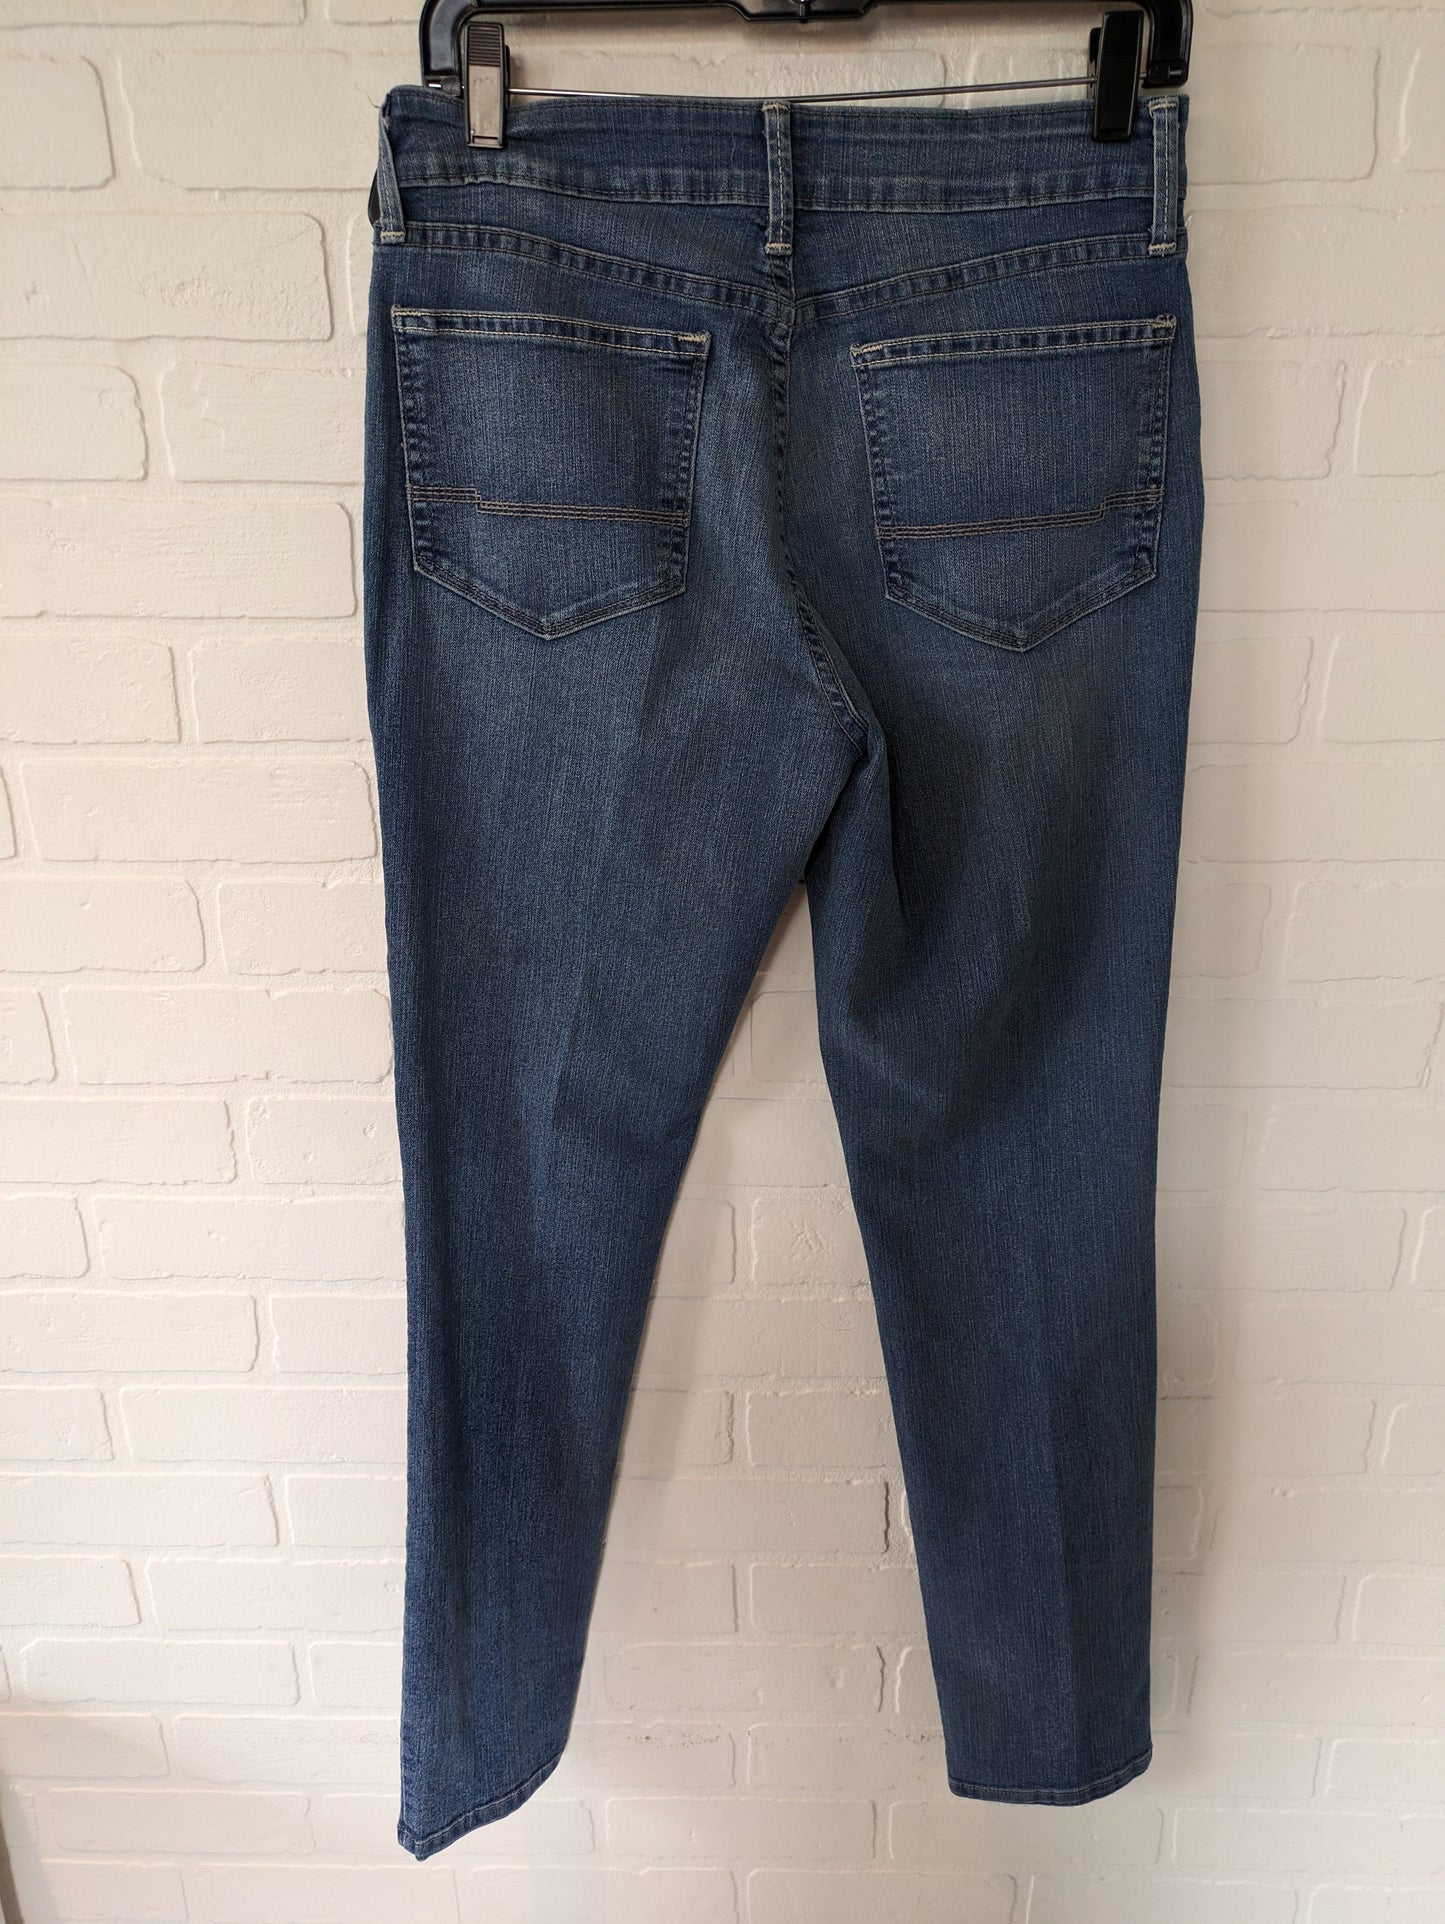 Blue Denim Jeans Jeggings Not Your Daughters Jeans, Size 8